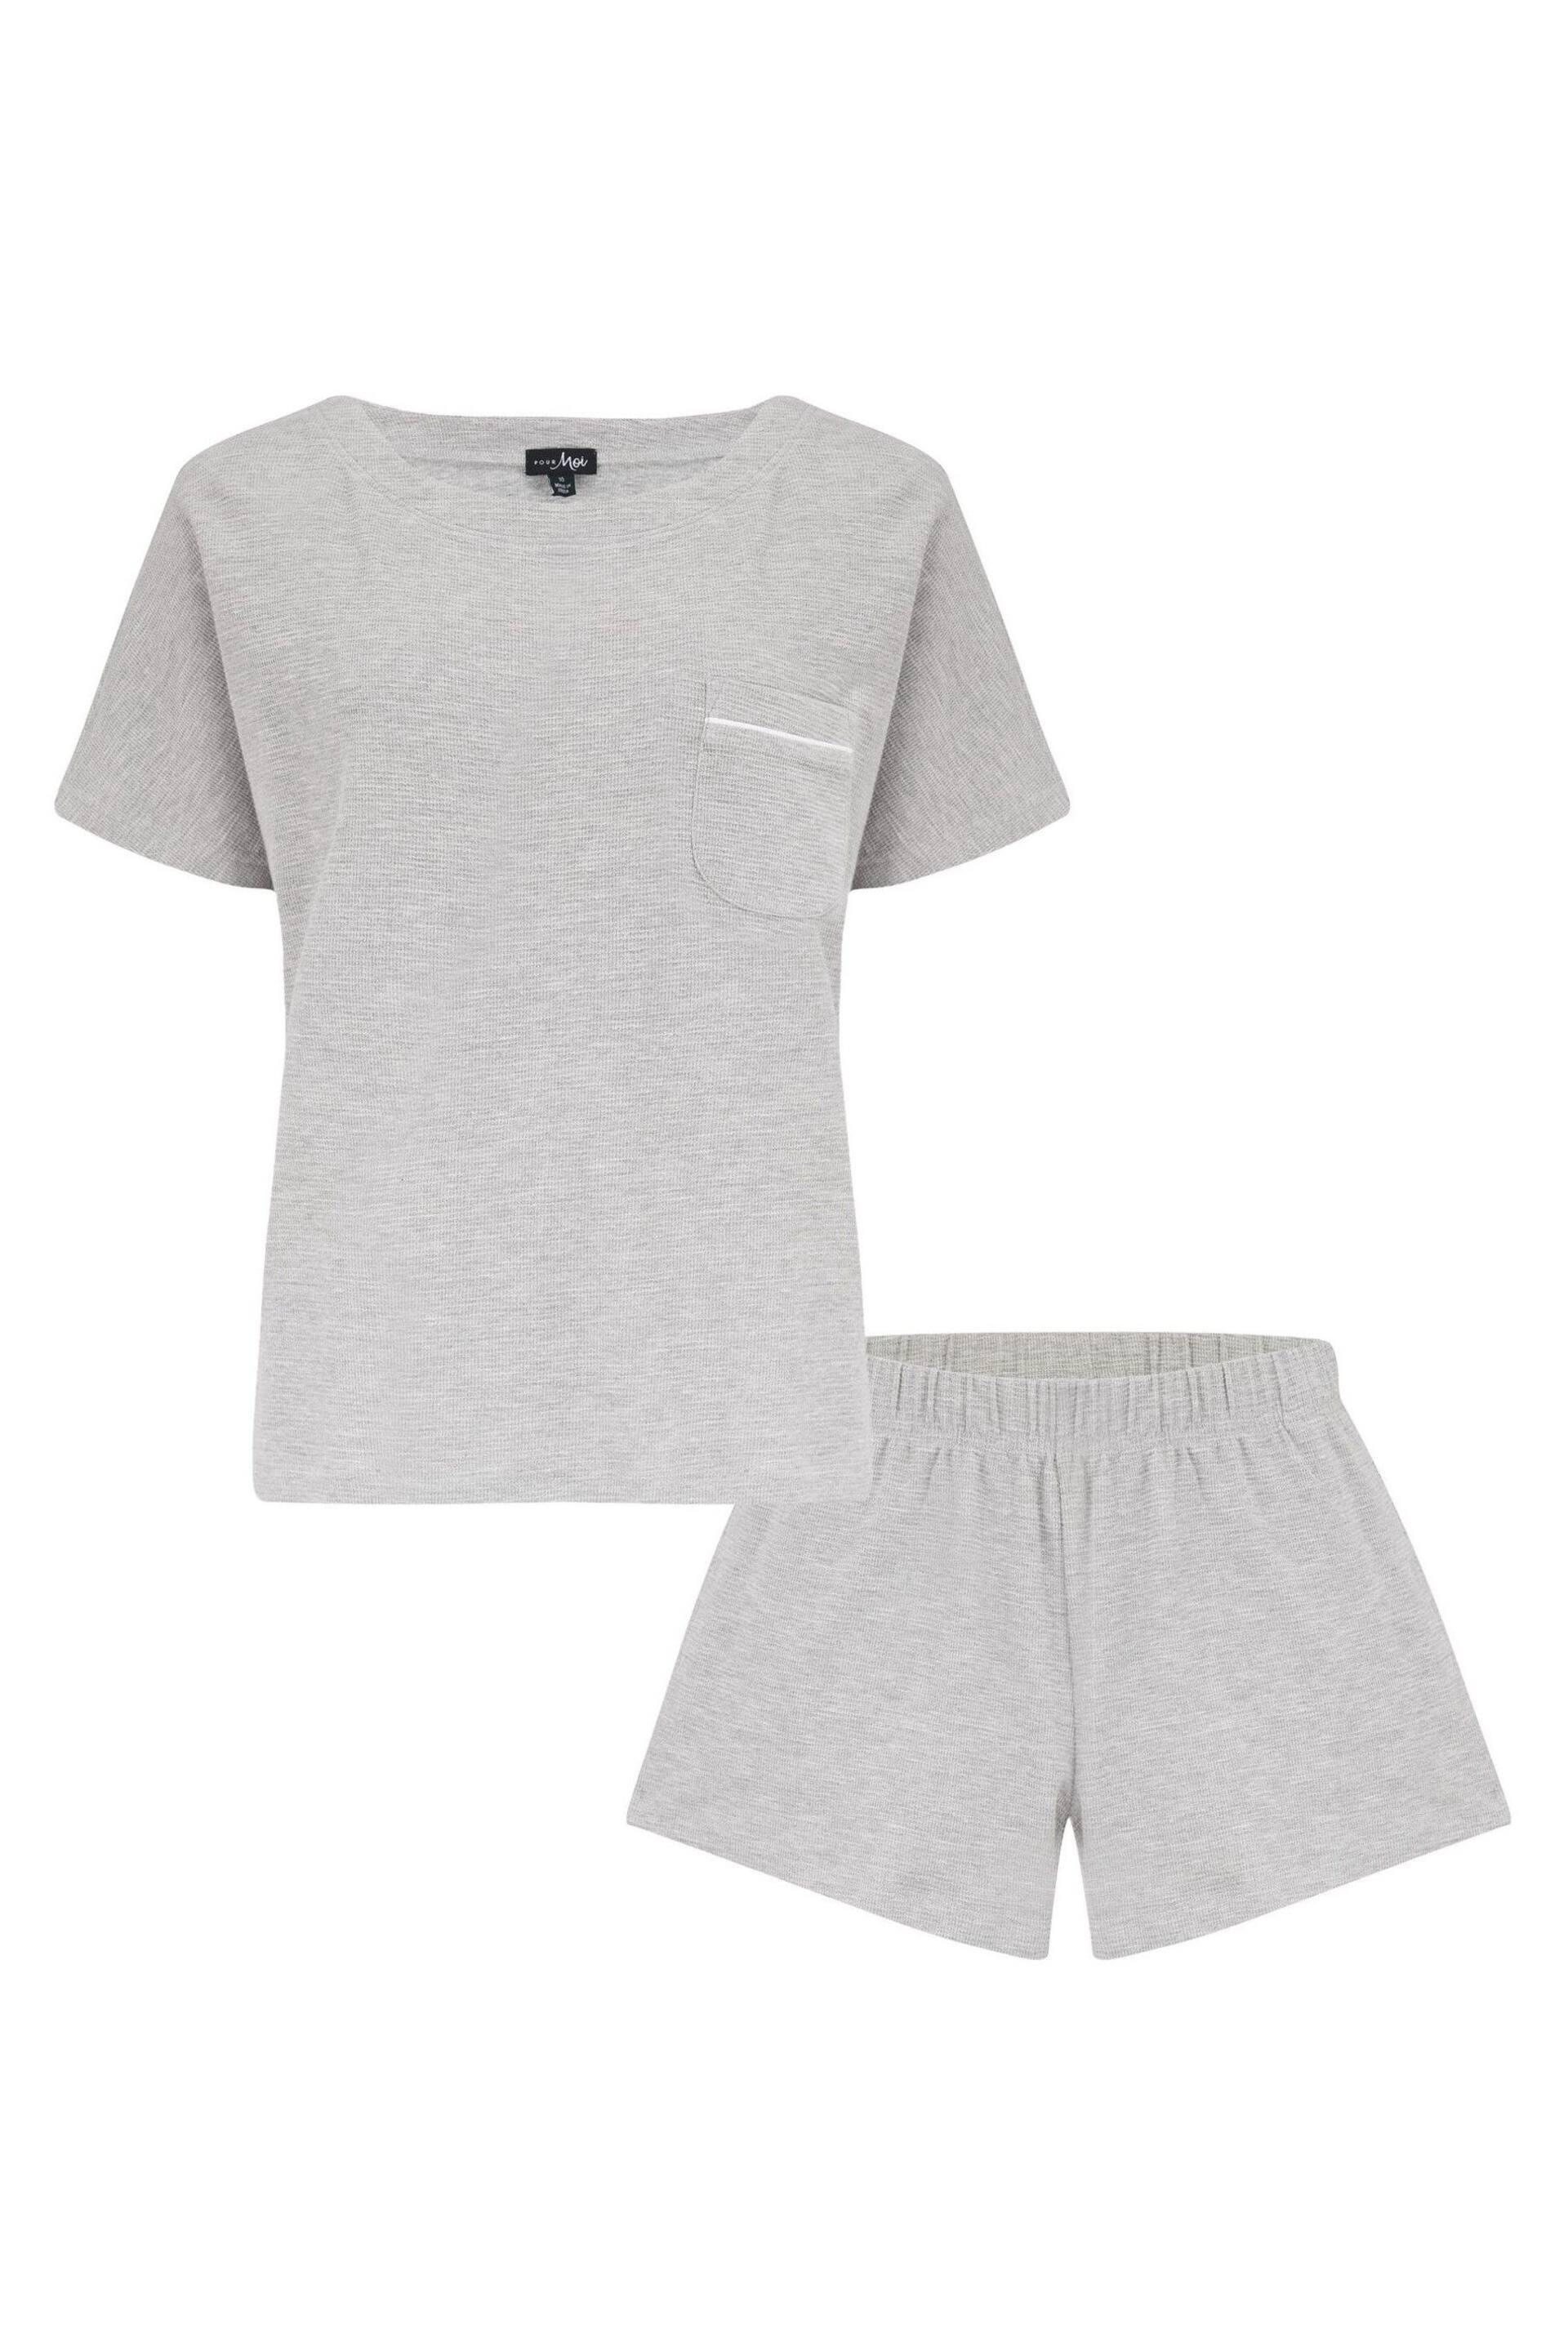 Pour Moi Grey Waffle Pocket Detail Top and Short Loungewear Set - Image 4 of 4